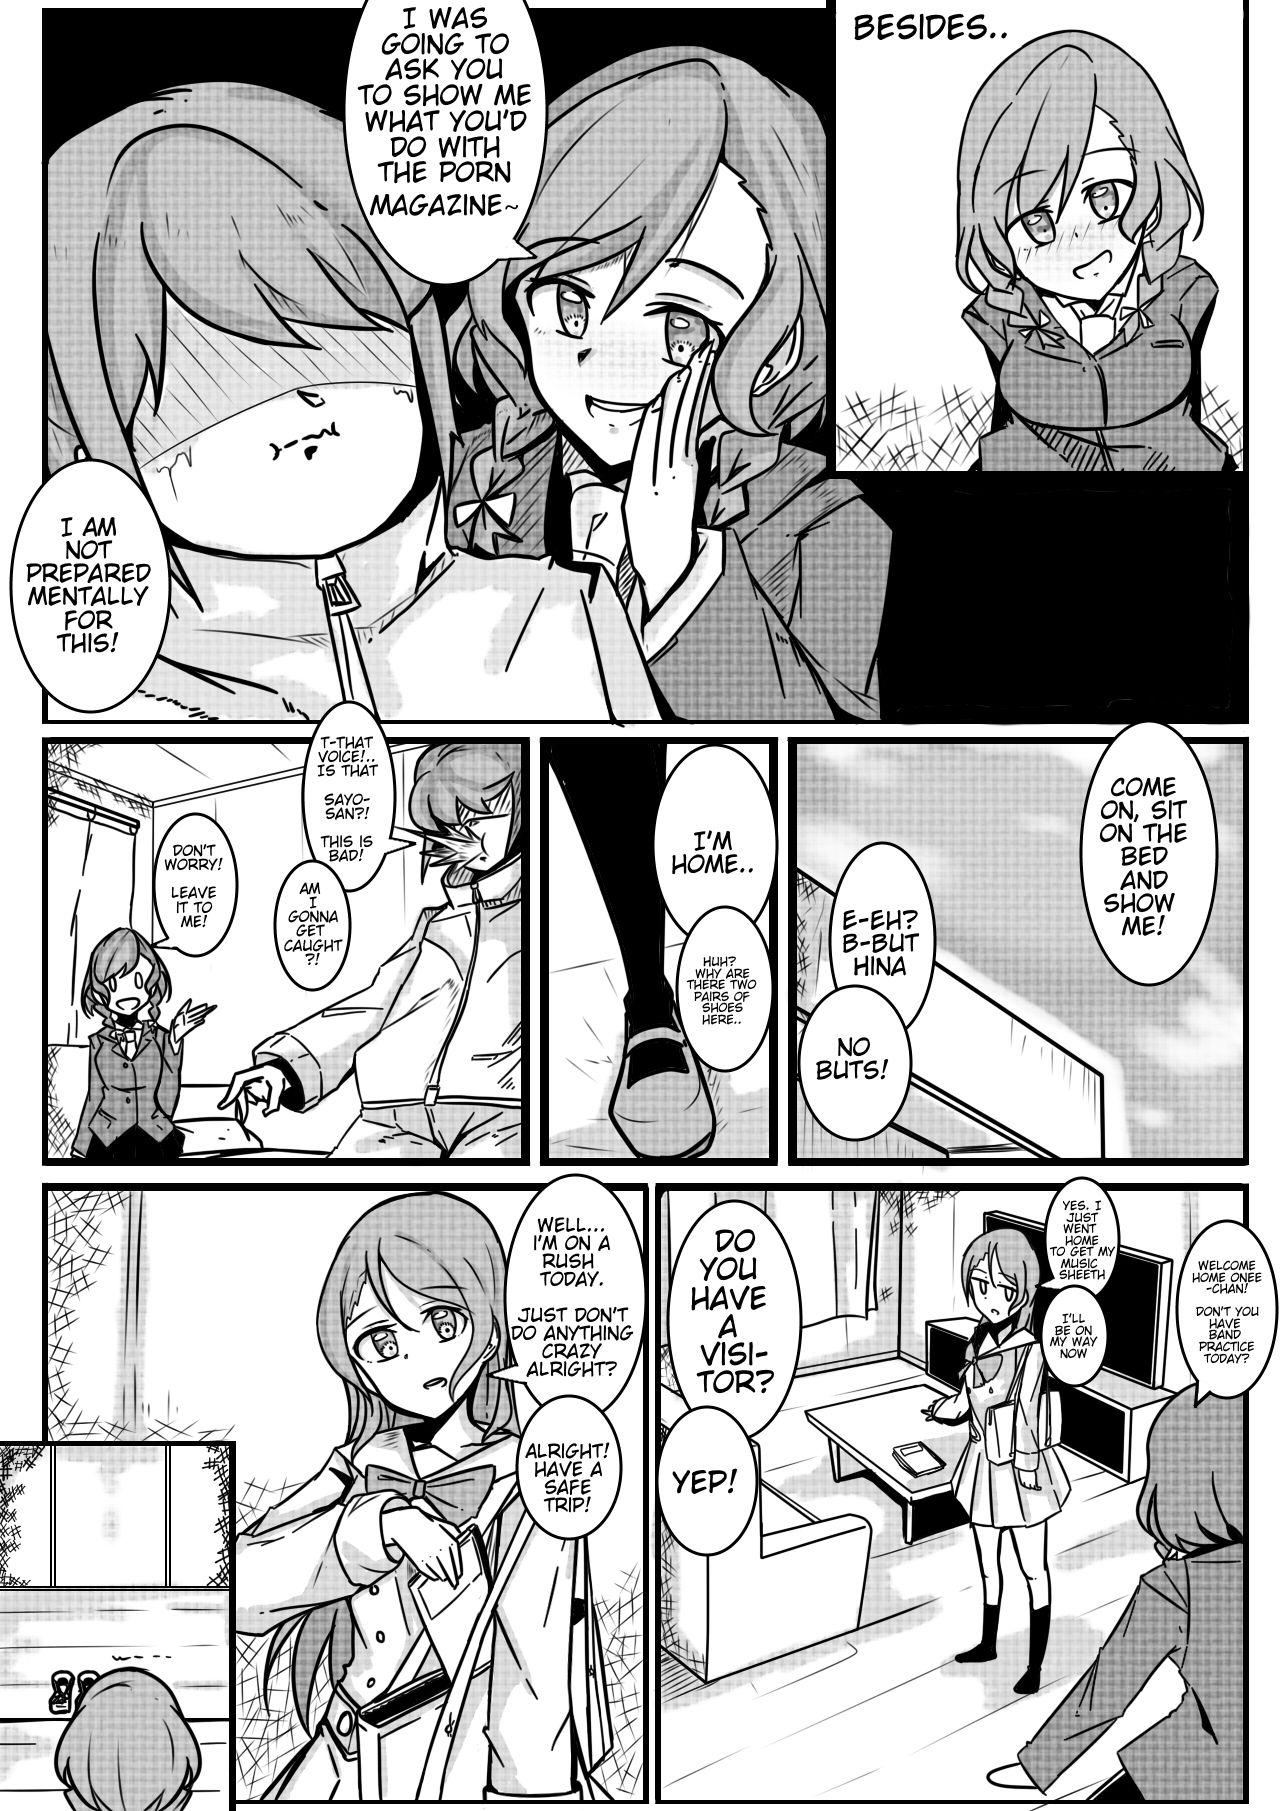 Nasty Minty Surprise - Bang dream Pasivo - Page 8